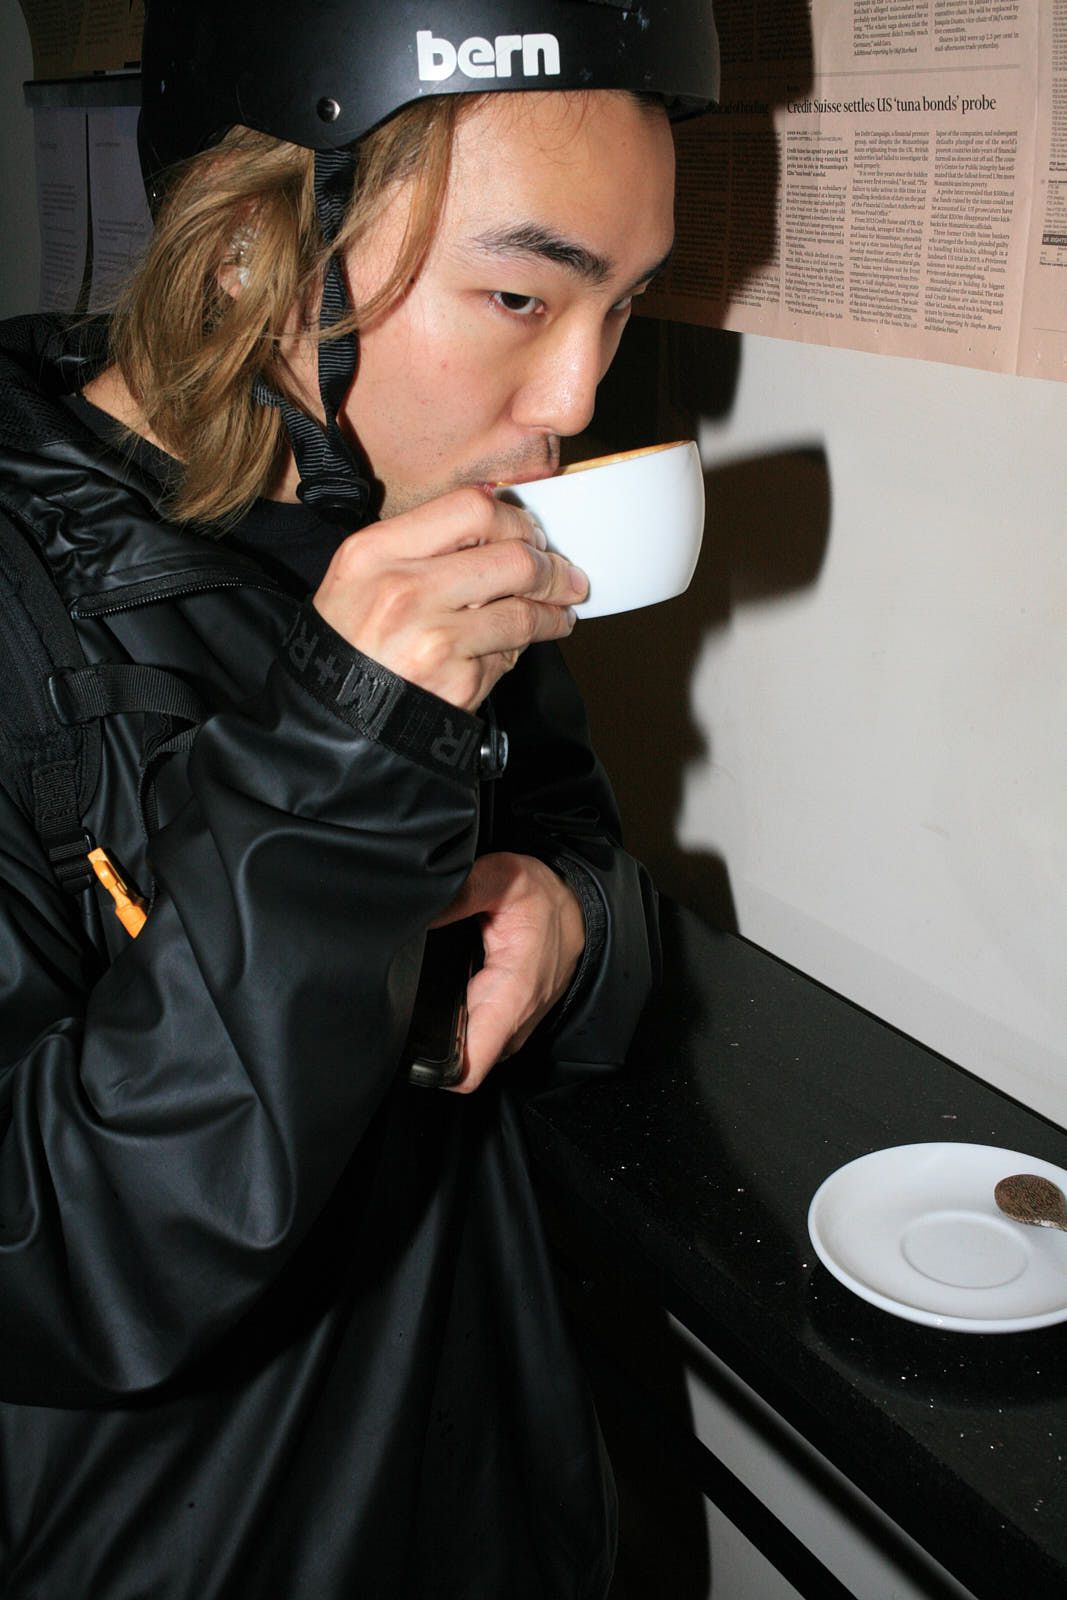 A man in a bike helmet with long blonde hair sips a coffee from a white ceramic cup.